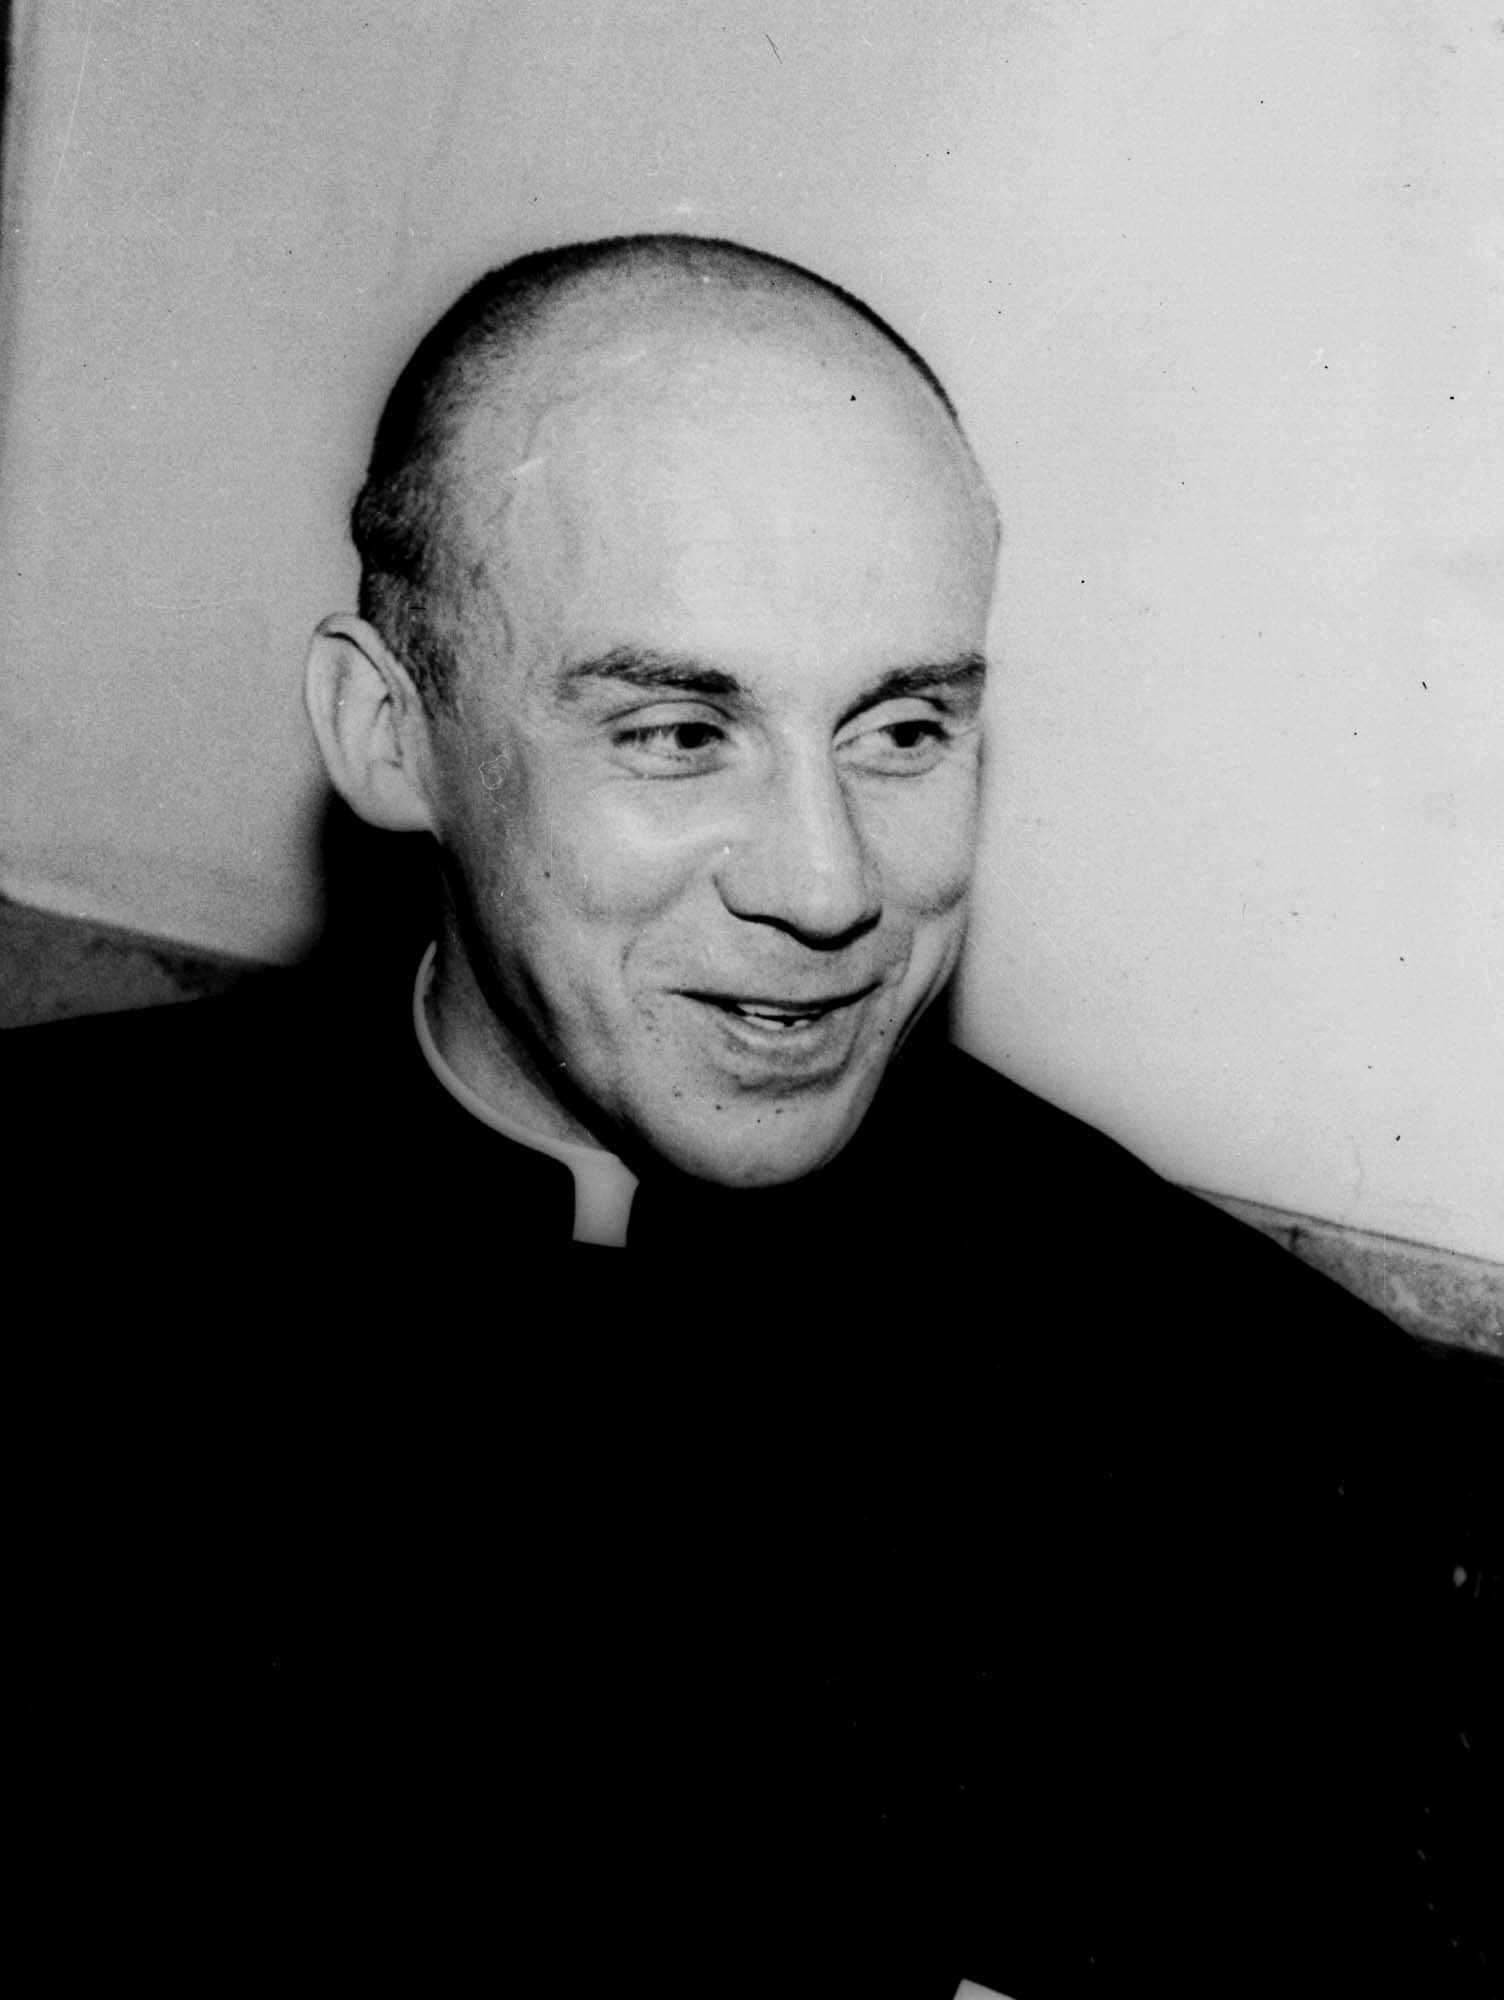 PHOTO: Thomas Merton, a Trappist monk known world-wide as an author and philosopher, is shown in 1951.